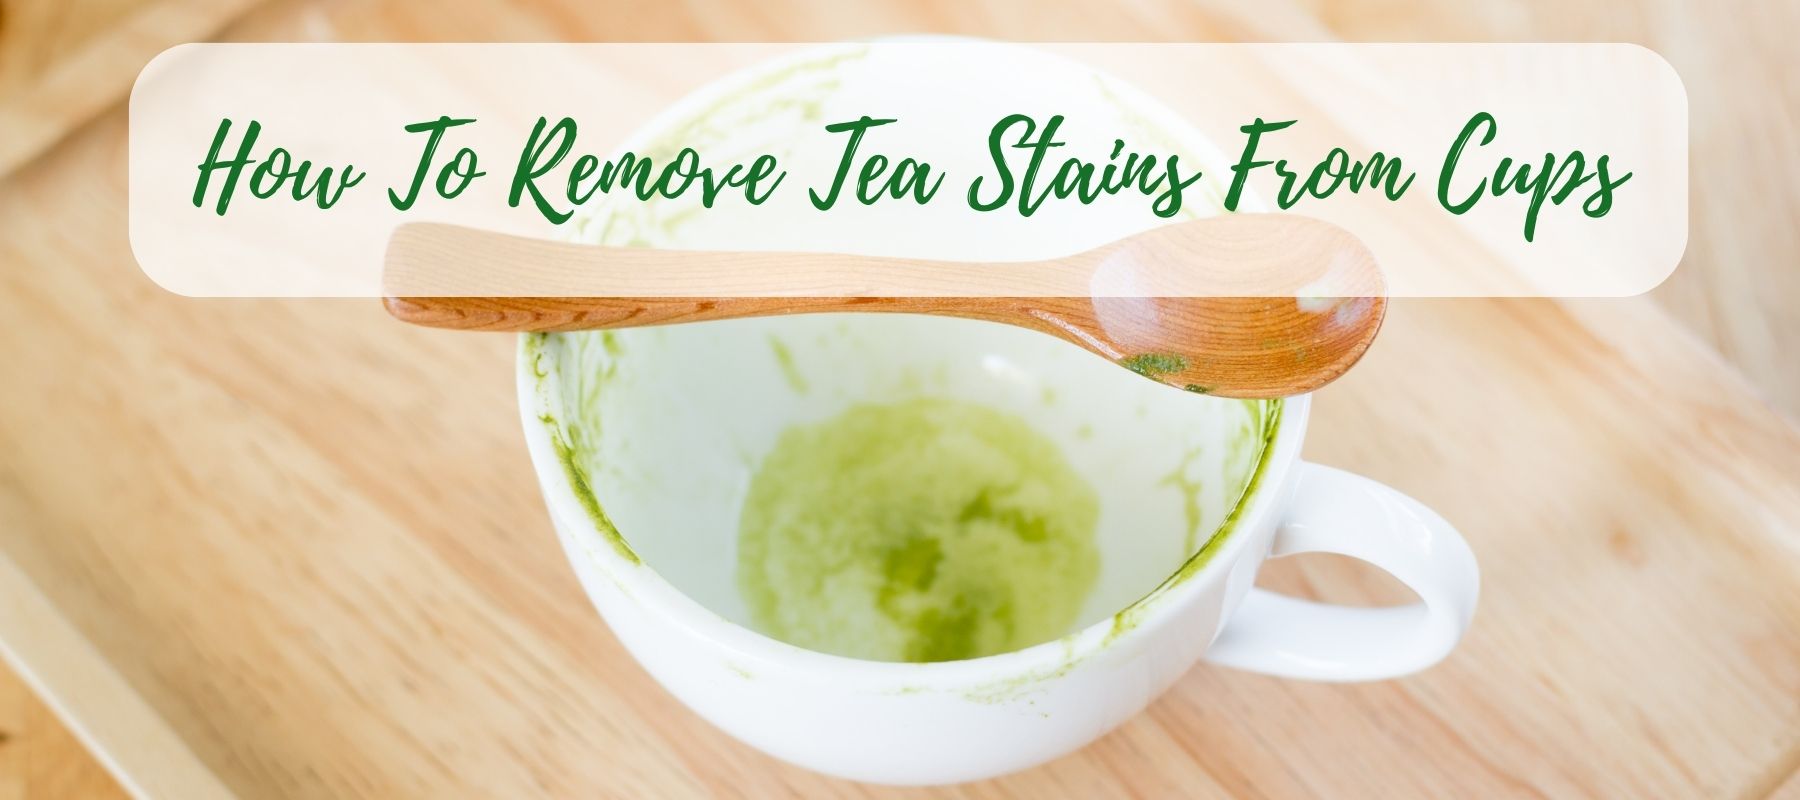 How-to-remove-tea-stains-from-cups